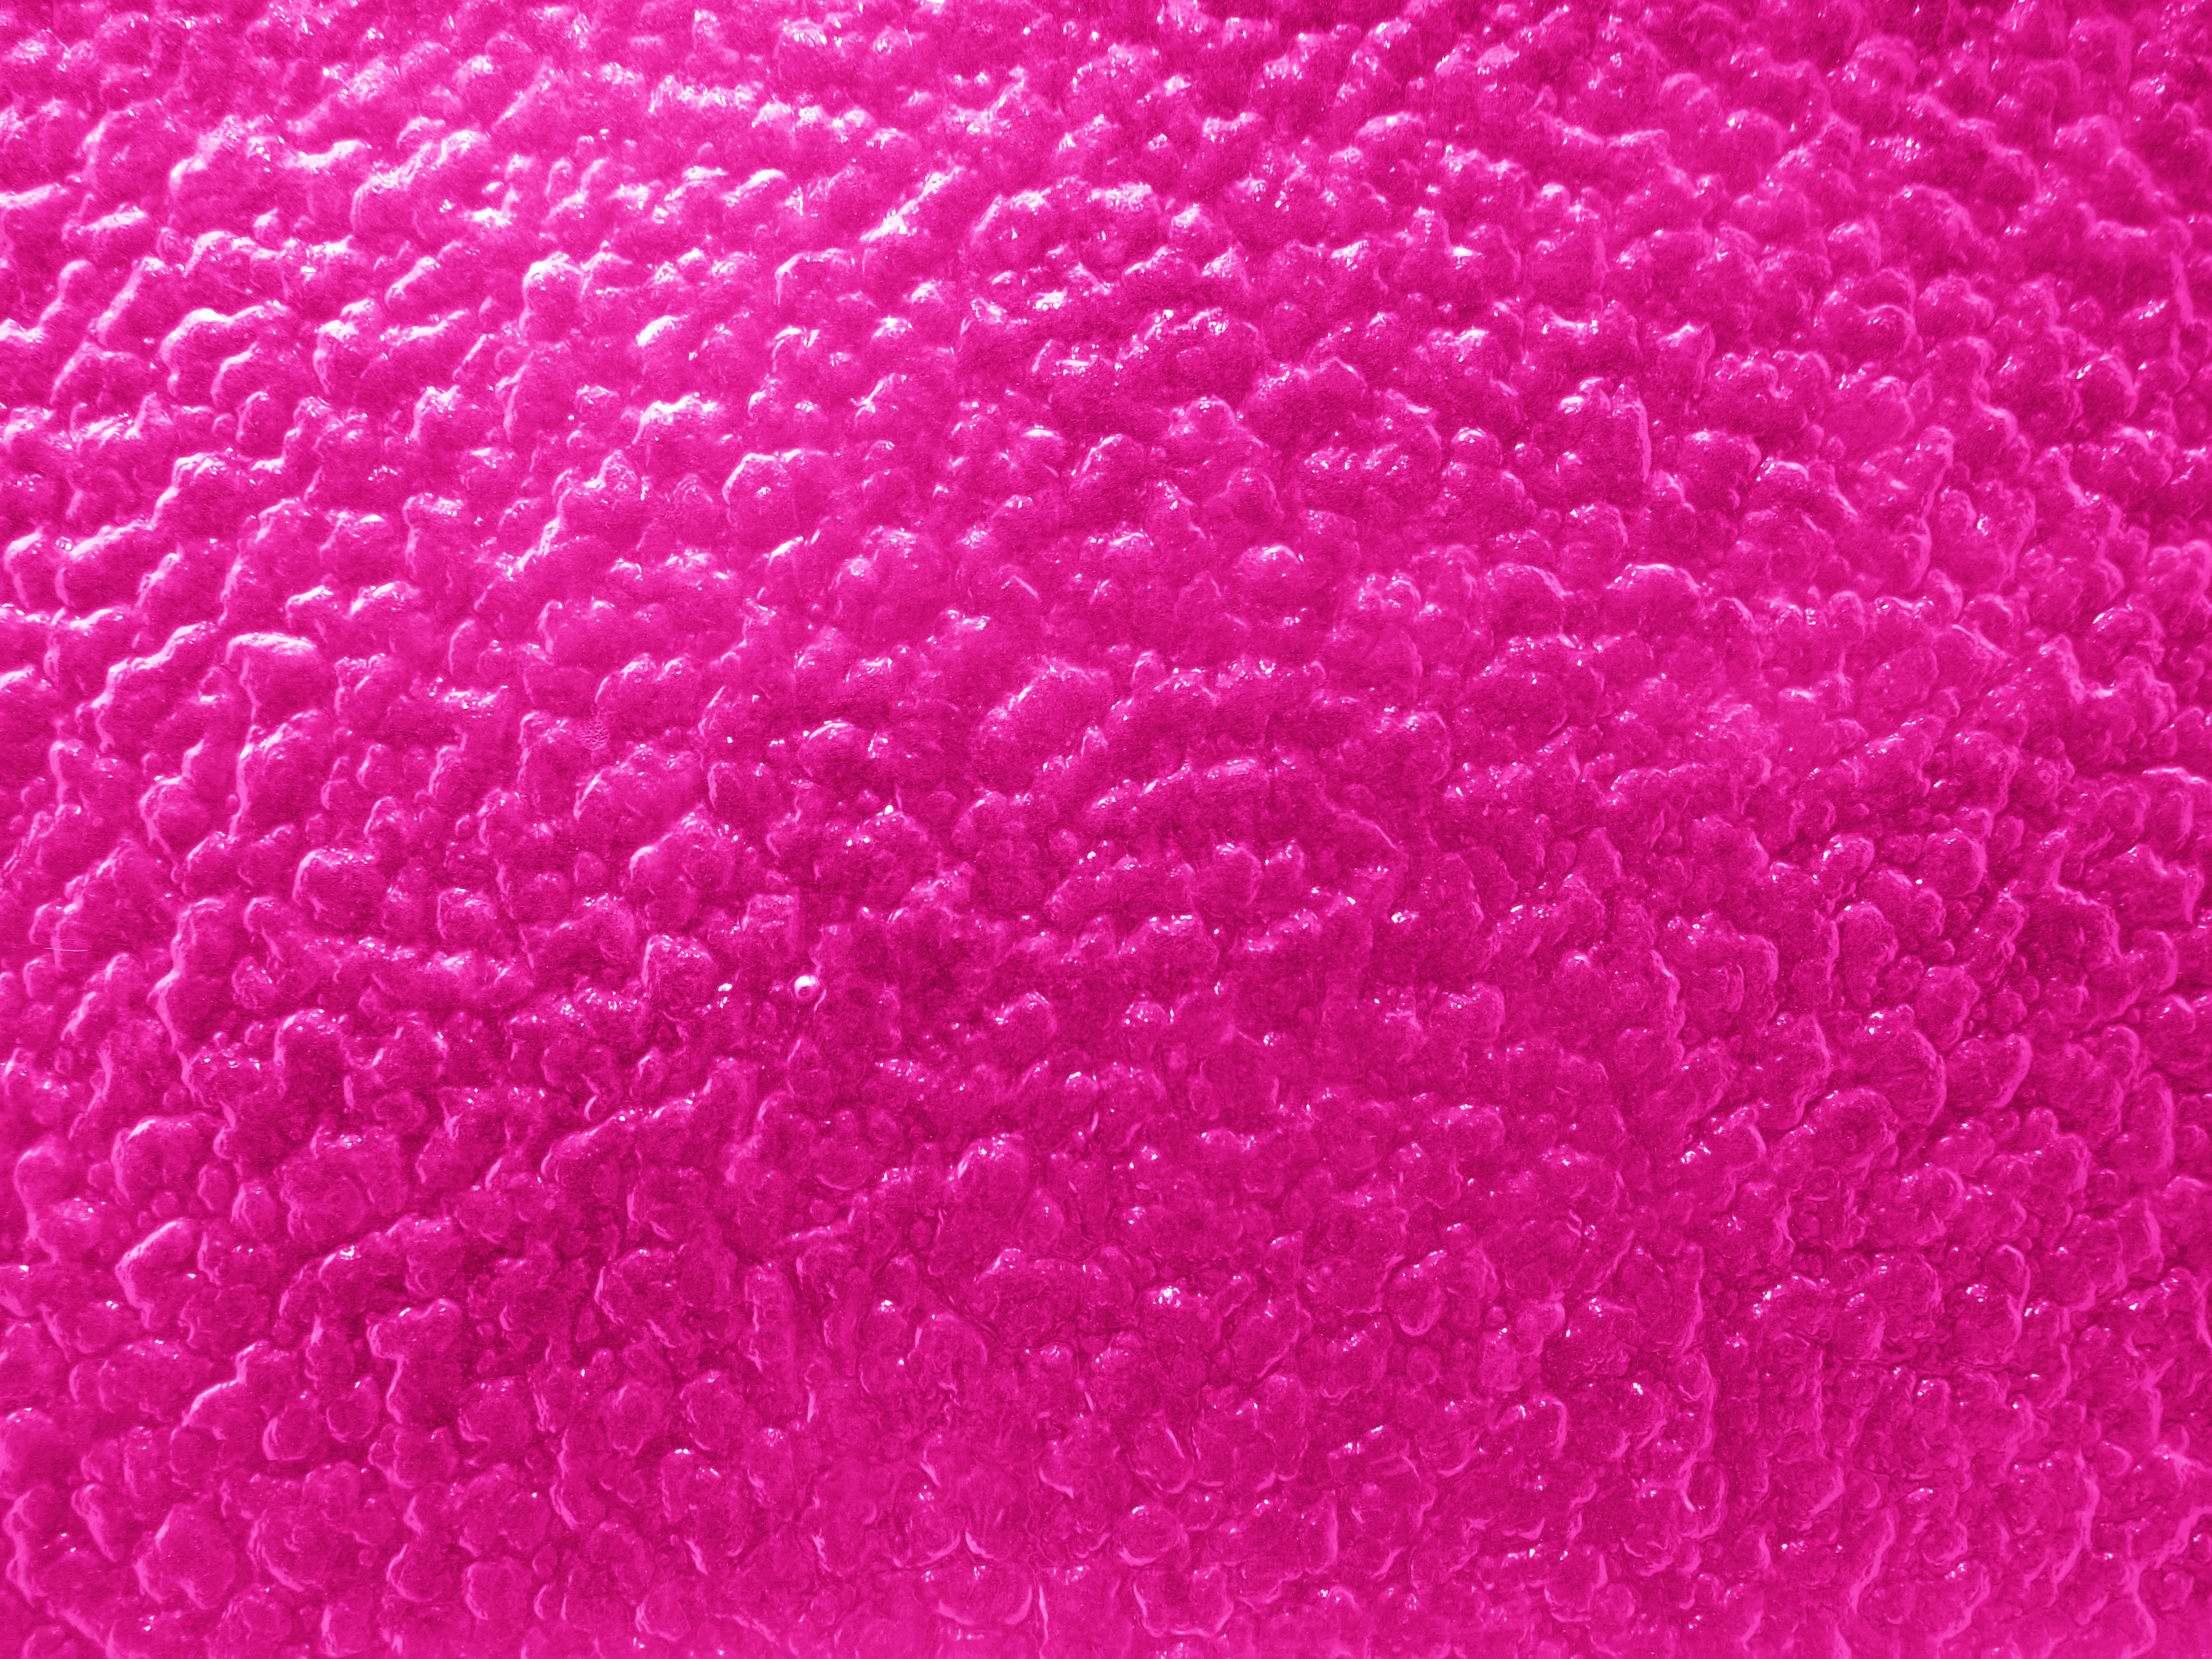 Hot Pink Textured Glass with Bumpy Surface Picture | Free Photograph |  Photos Public Domain